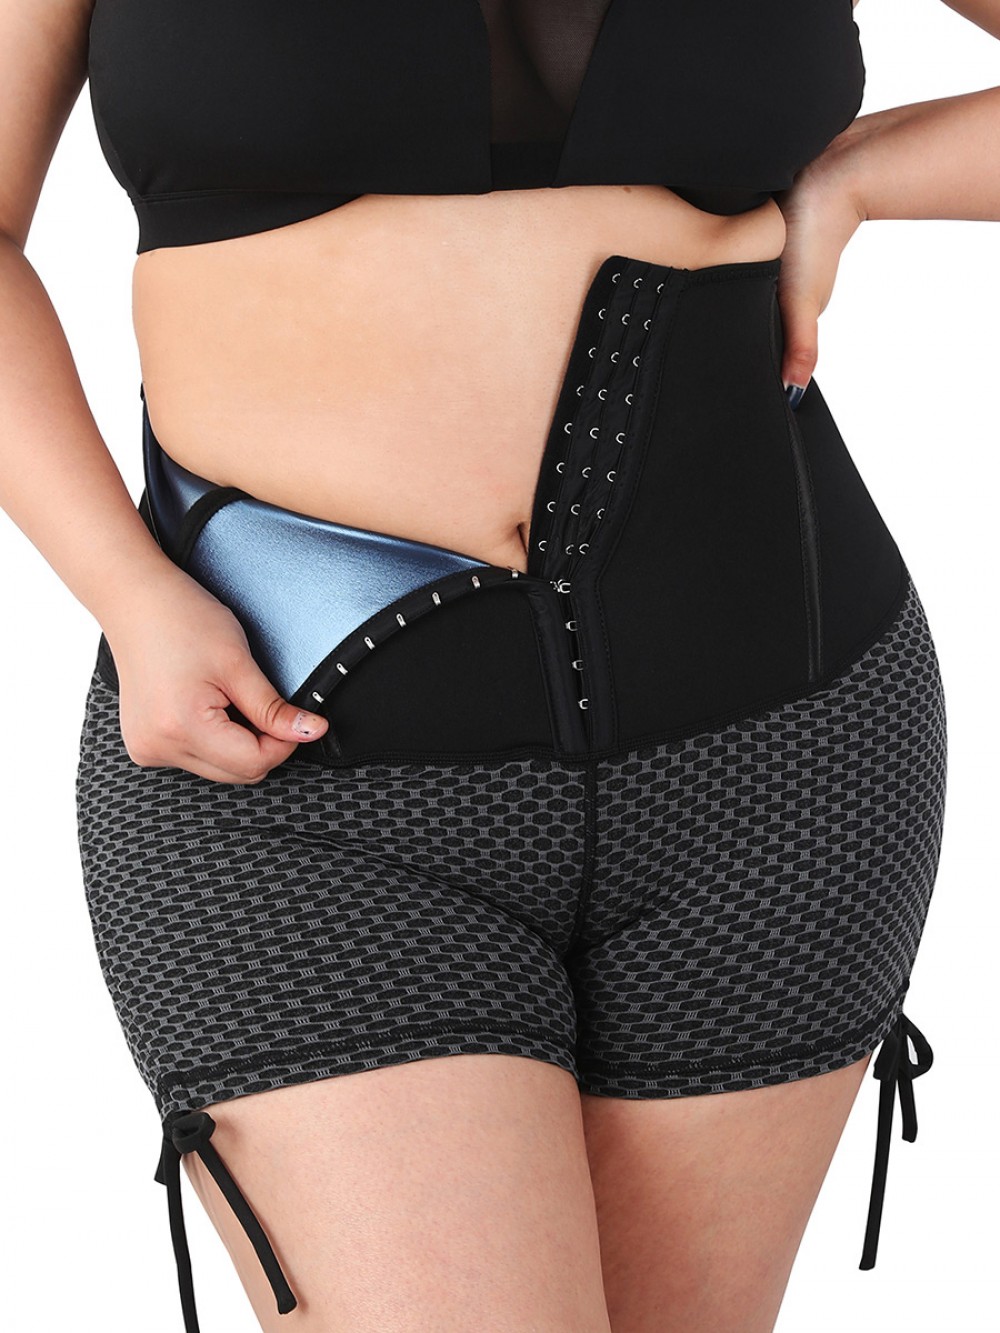 New 2 In 1 Neoprene Waist Trainer And Butt Lifter Yoga Pants